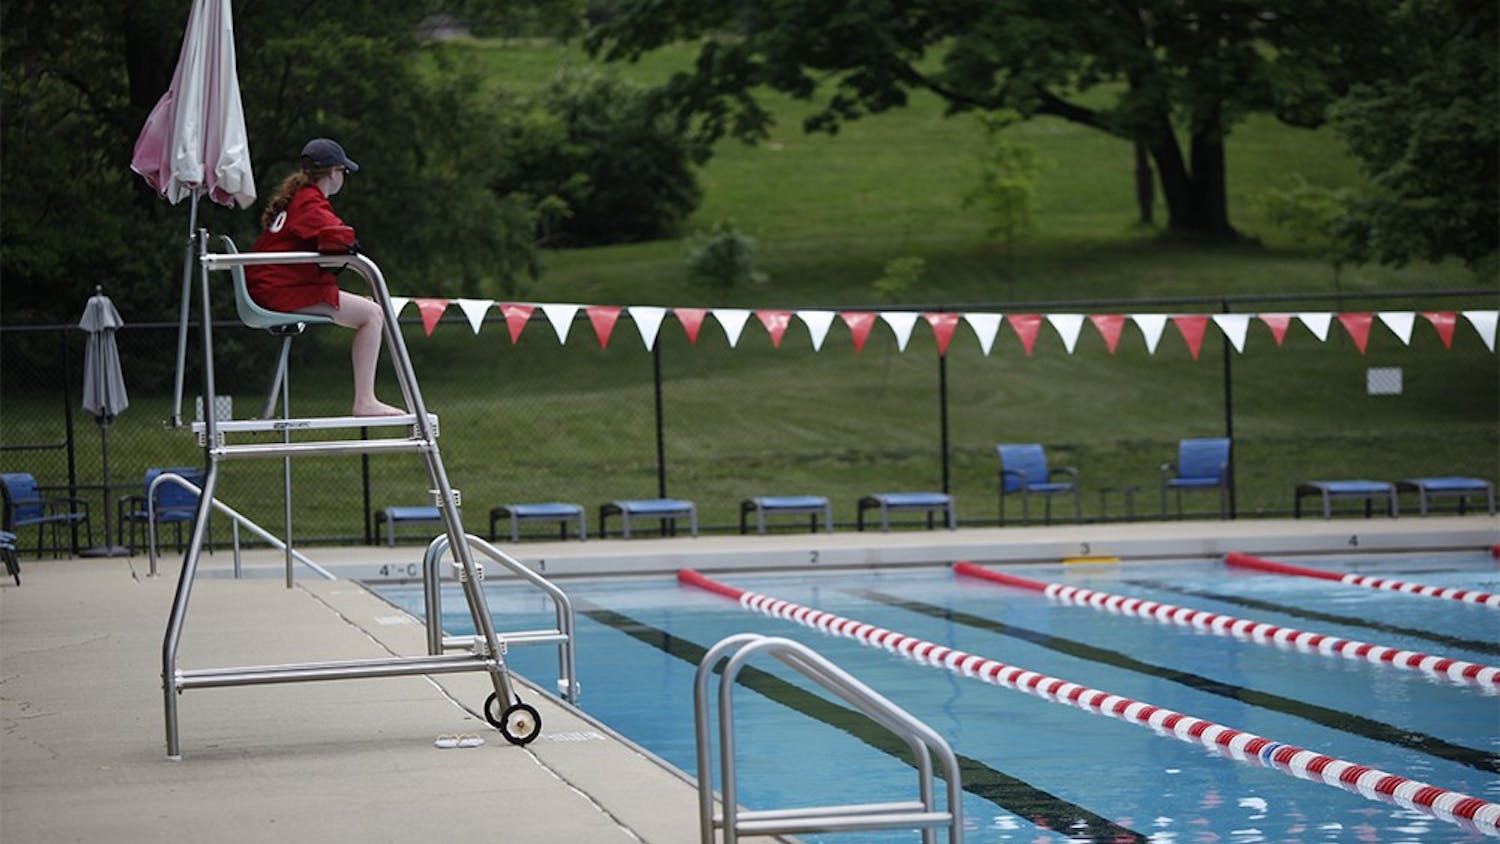 Lifeguard Amanda Viscardi overlooks swimmers in the 50 meter pool at the IU outdoor pool on Wednesday.  The pool is open mid-day for "Warm Up Days", but will not reopen for the regular season until May 23.